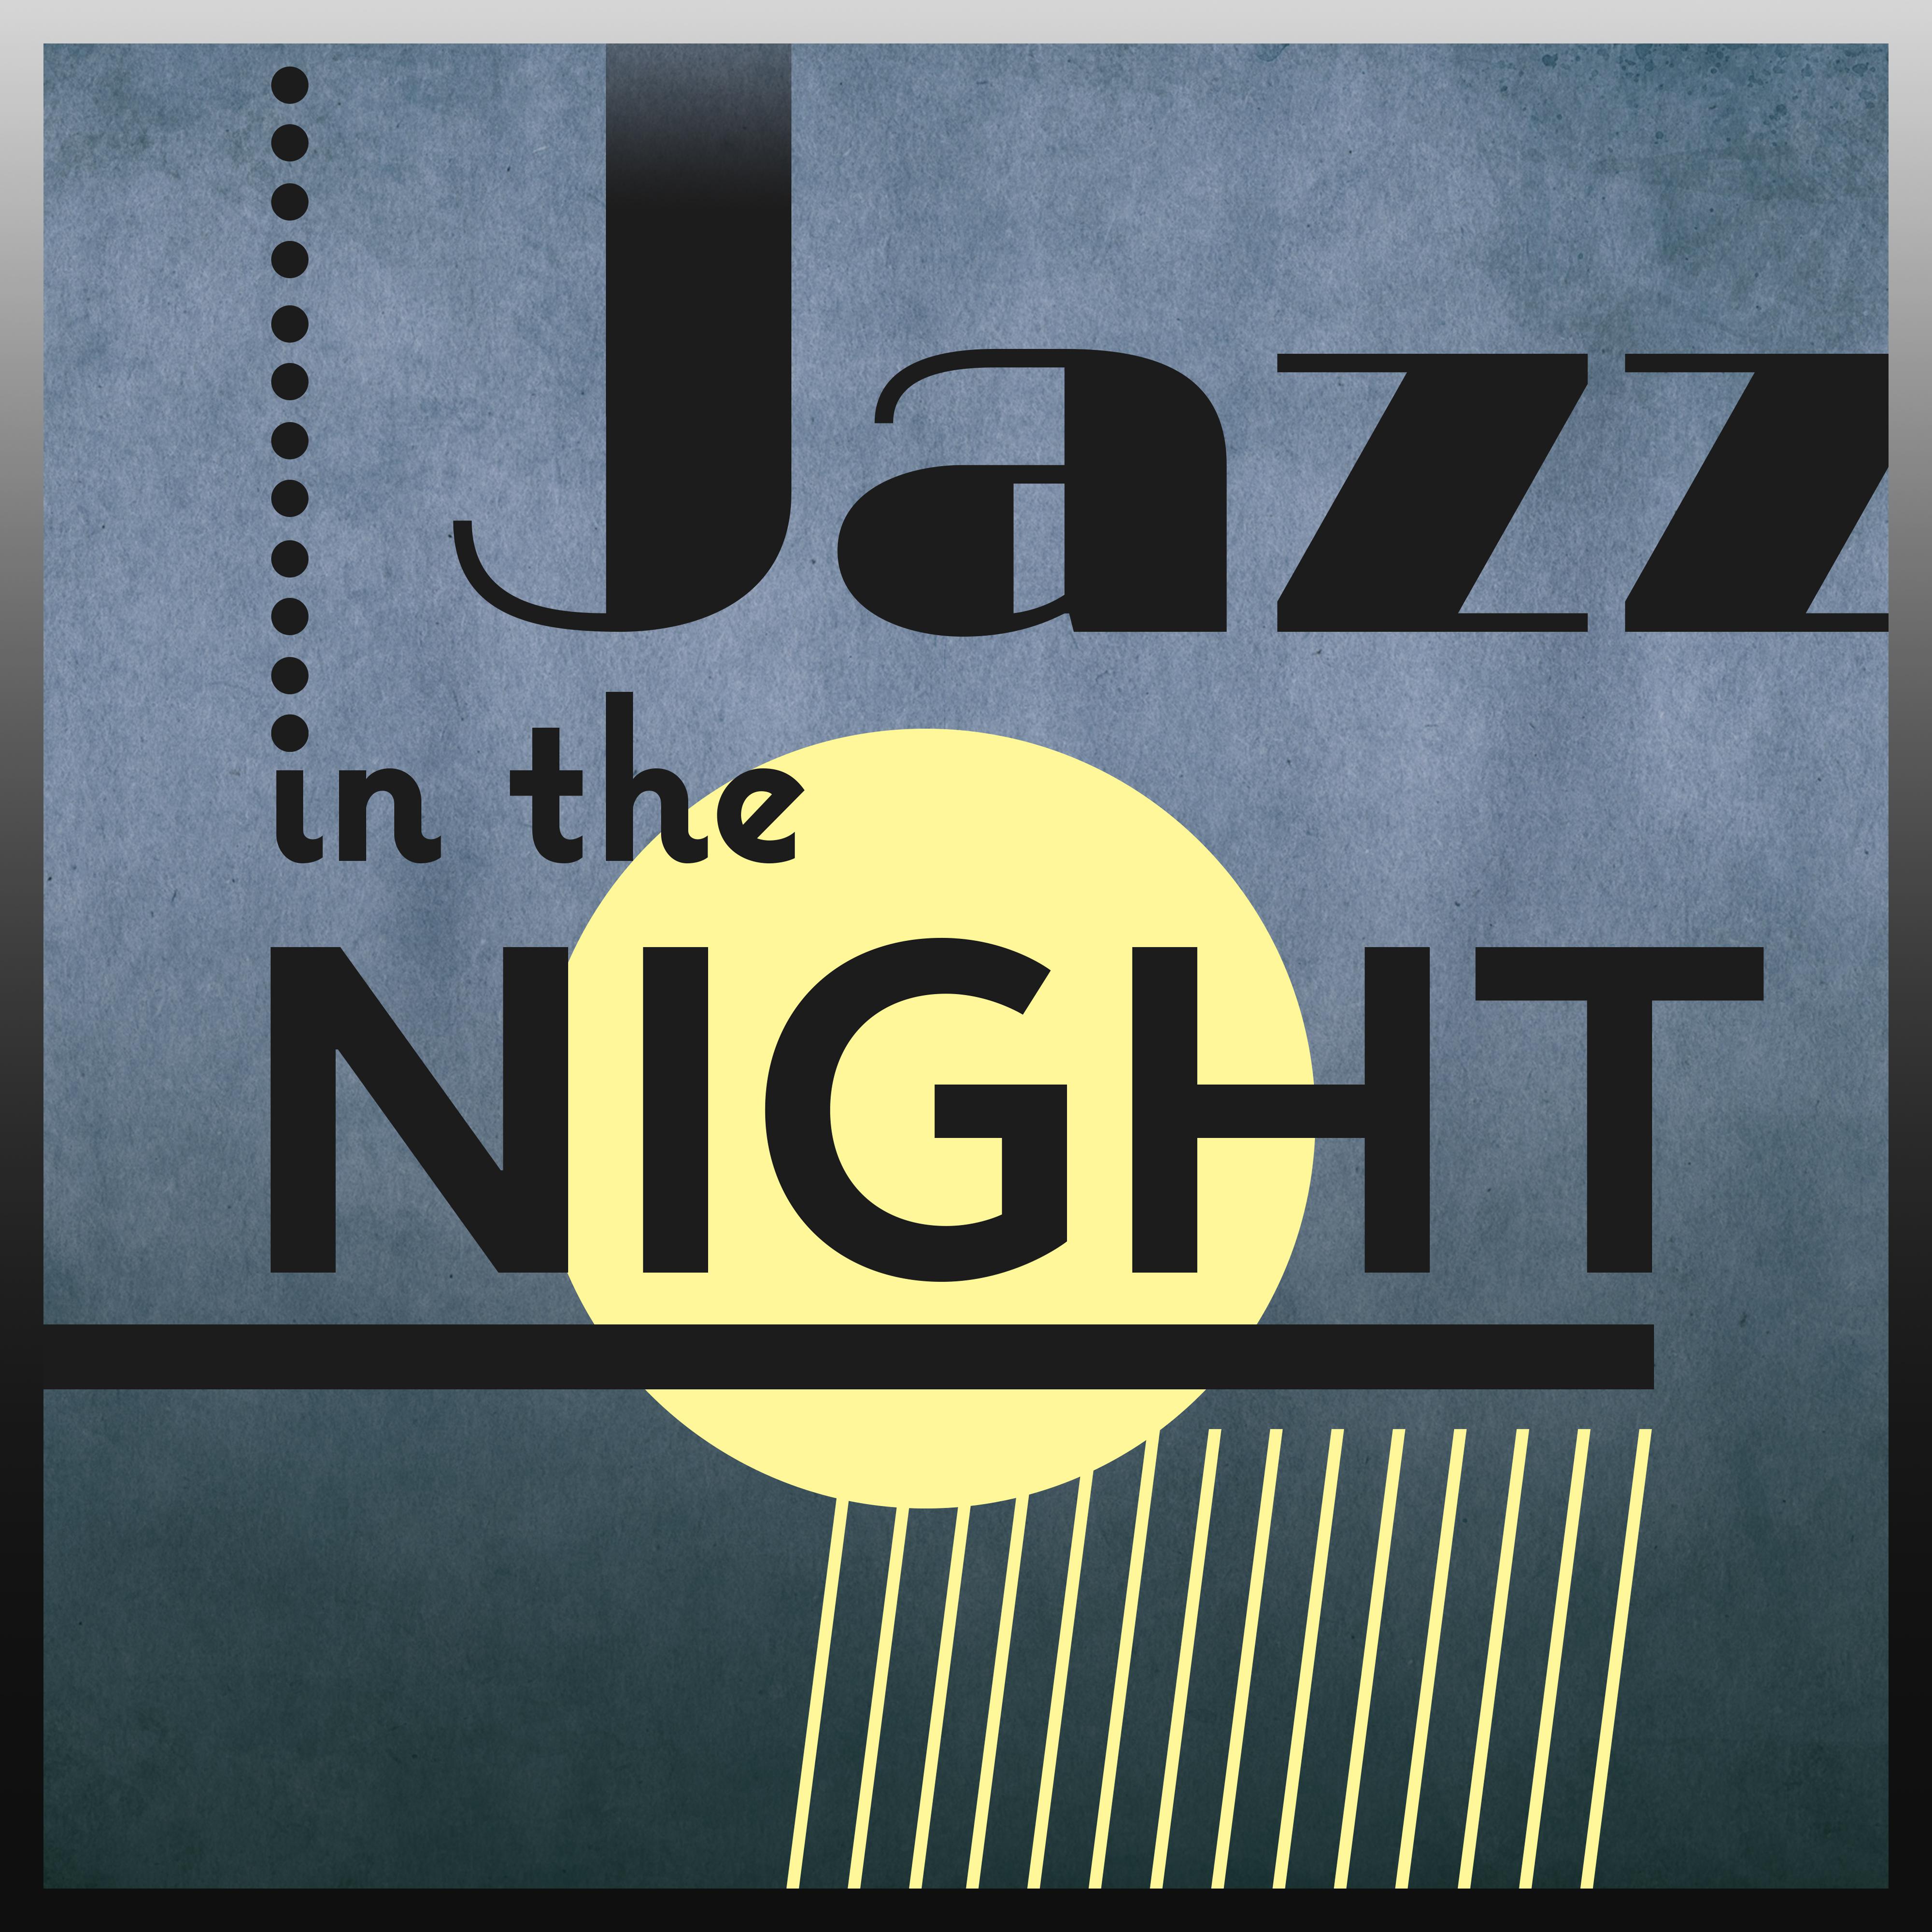 Jazz in the Night  Calm Down with Jazz, Night Jazz Club, Piano Bar, Relaxing Sounds, Evening with Music